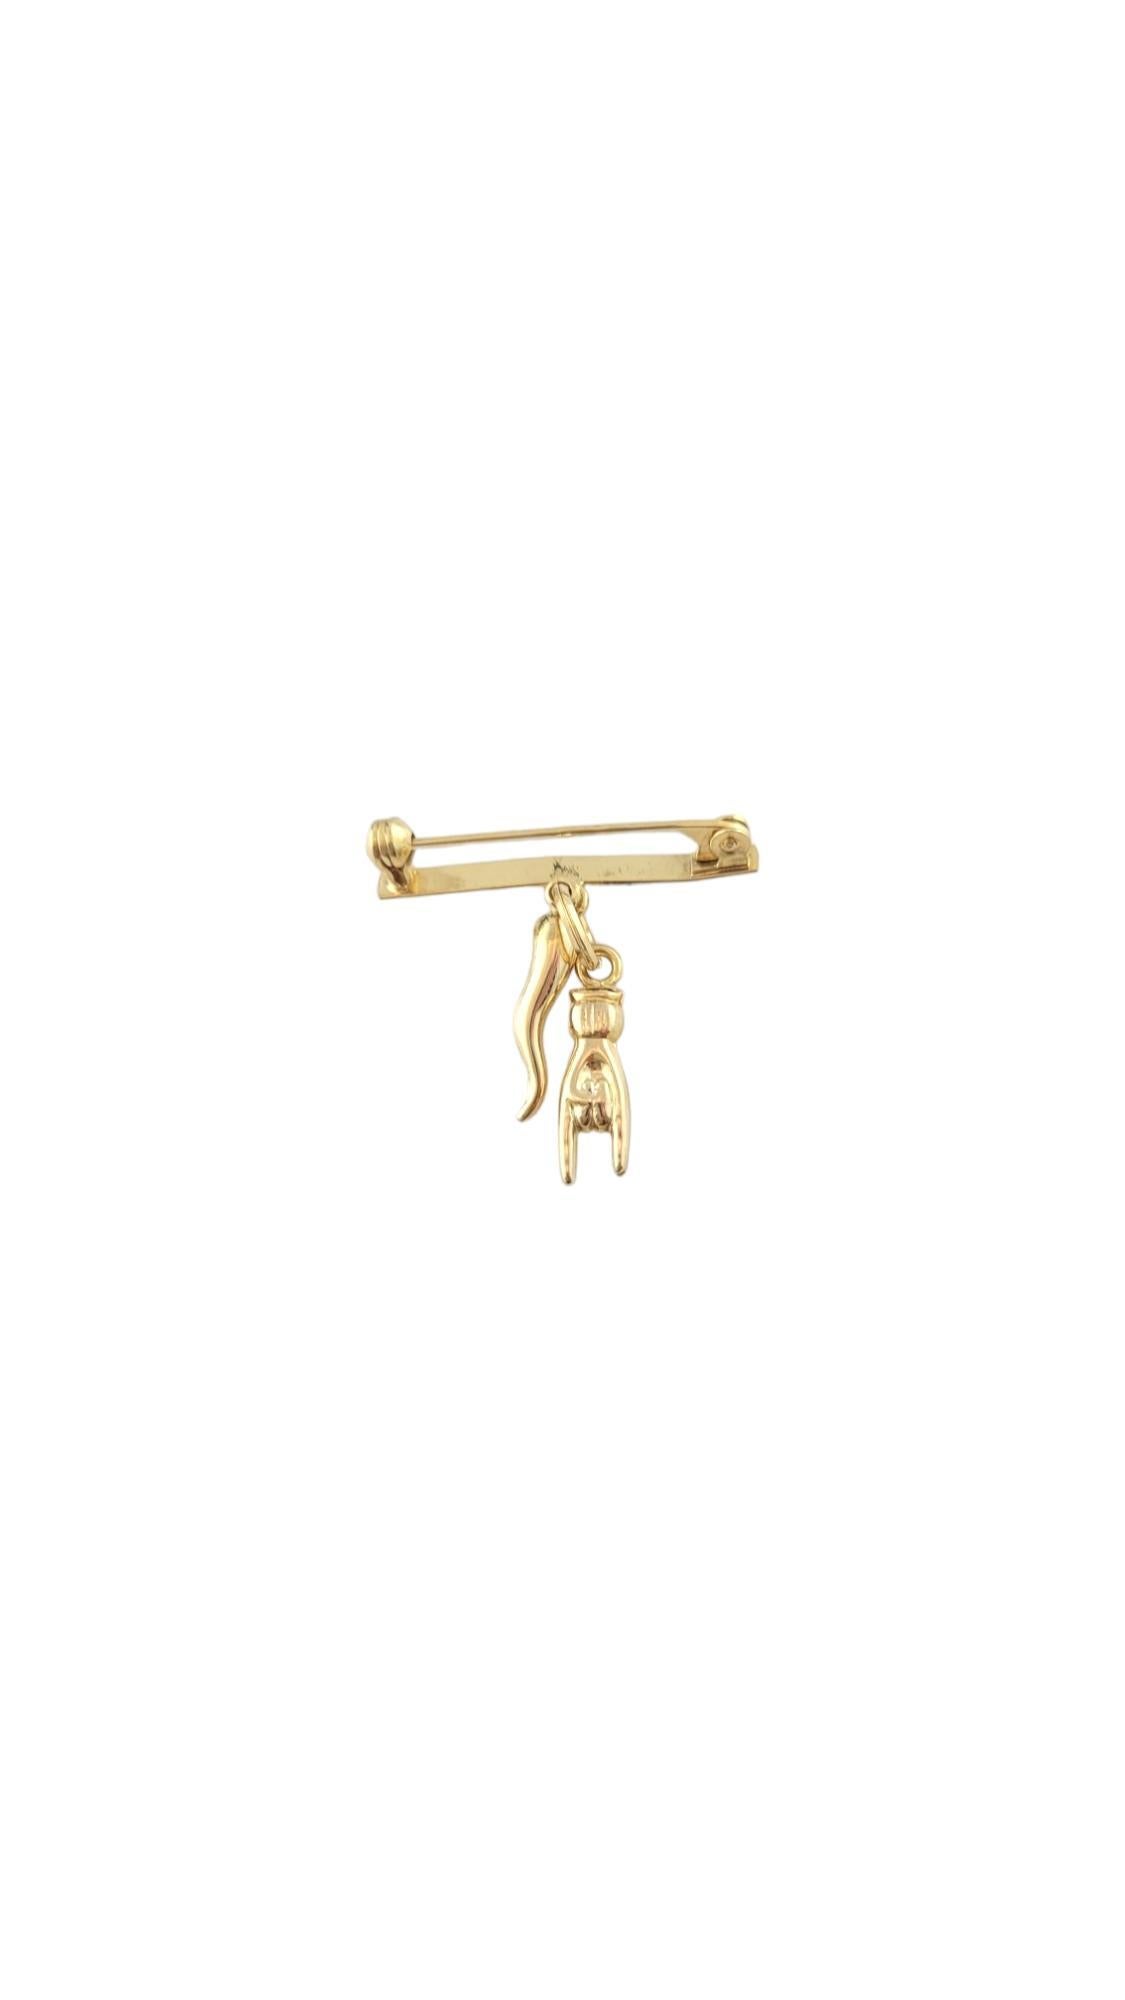 18K Yellow Gold Baby Italian Horn & Hand Pin #16782 For Sale 1